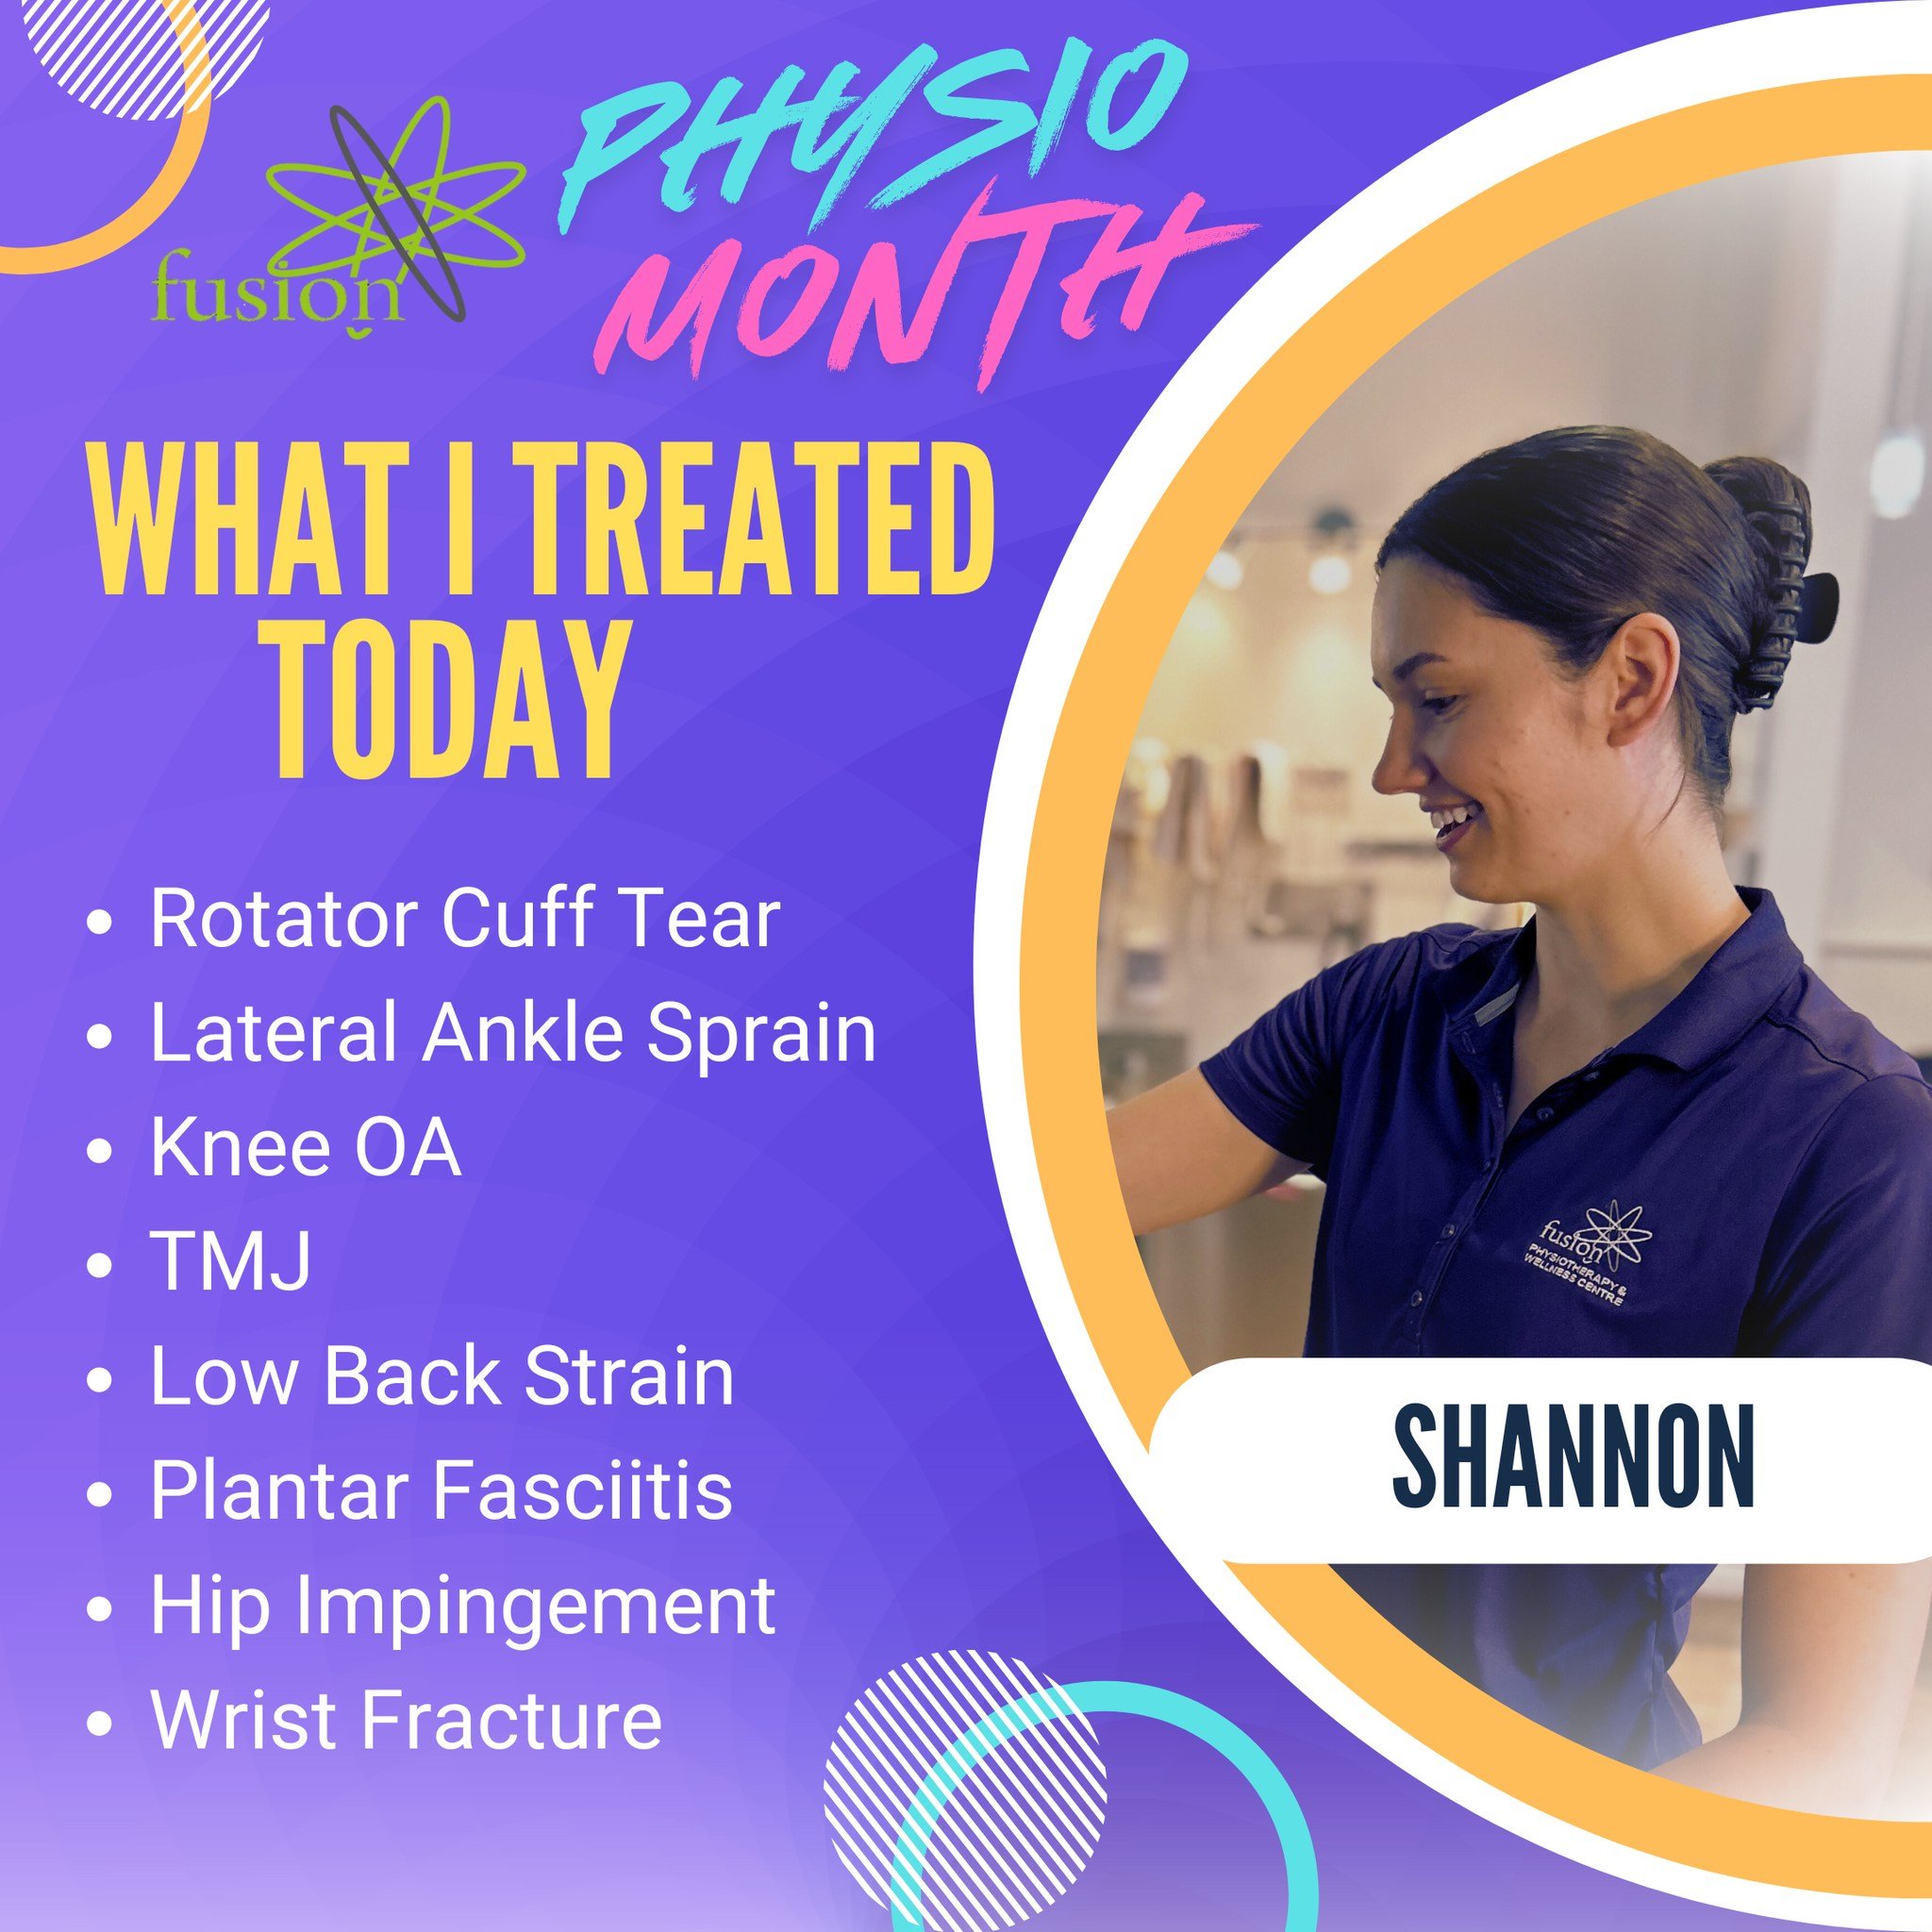 As part of Physio Month, we're highlighting what a typical caseload looks like for our team of therapists! From common occurrences to complex injuries, Shannon's expertise as a physiotherapist allows her to provide the best possible care in all situa